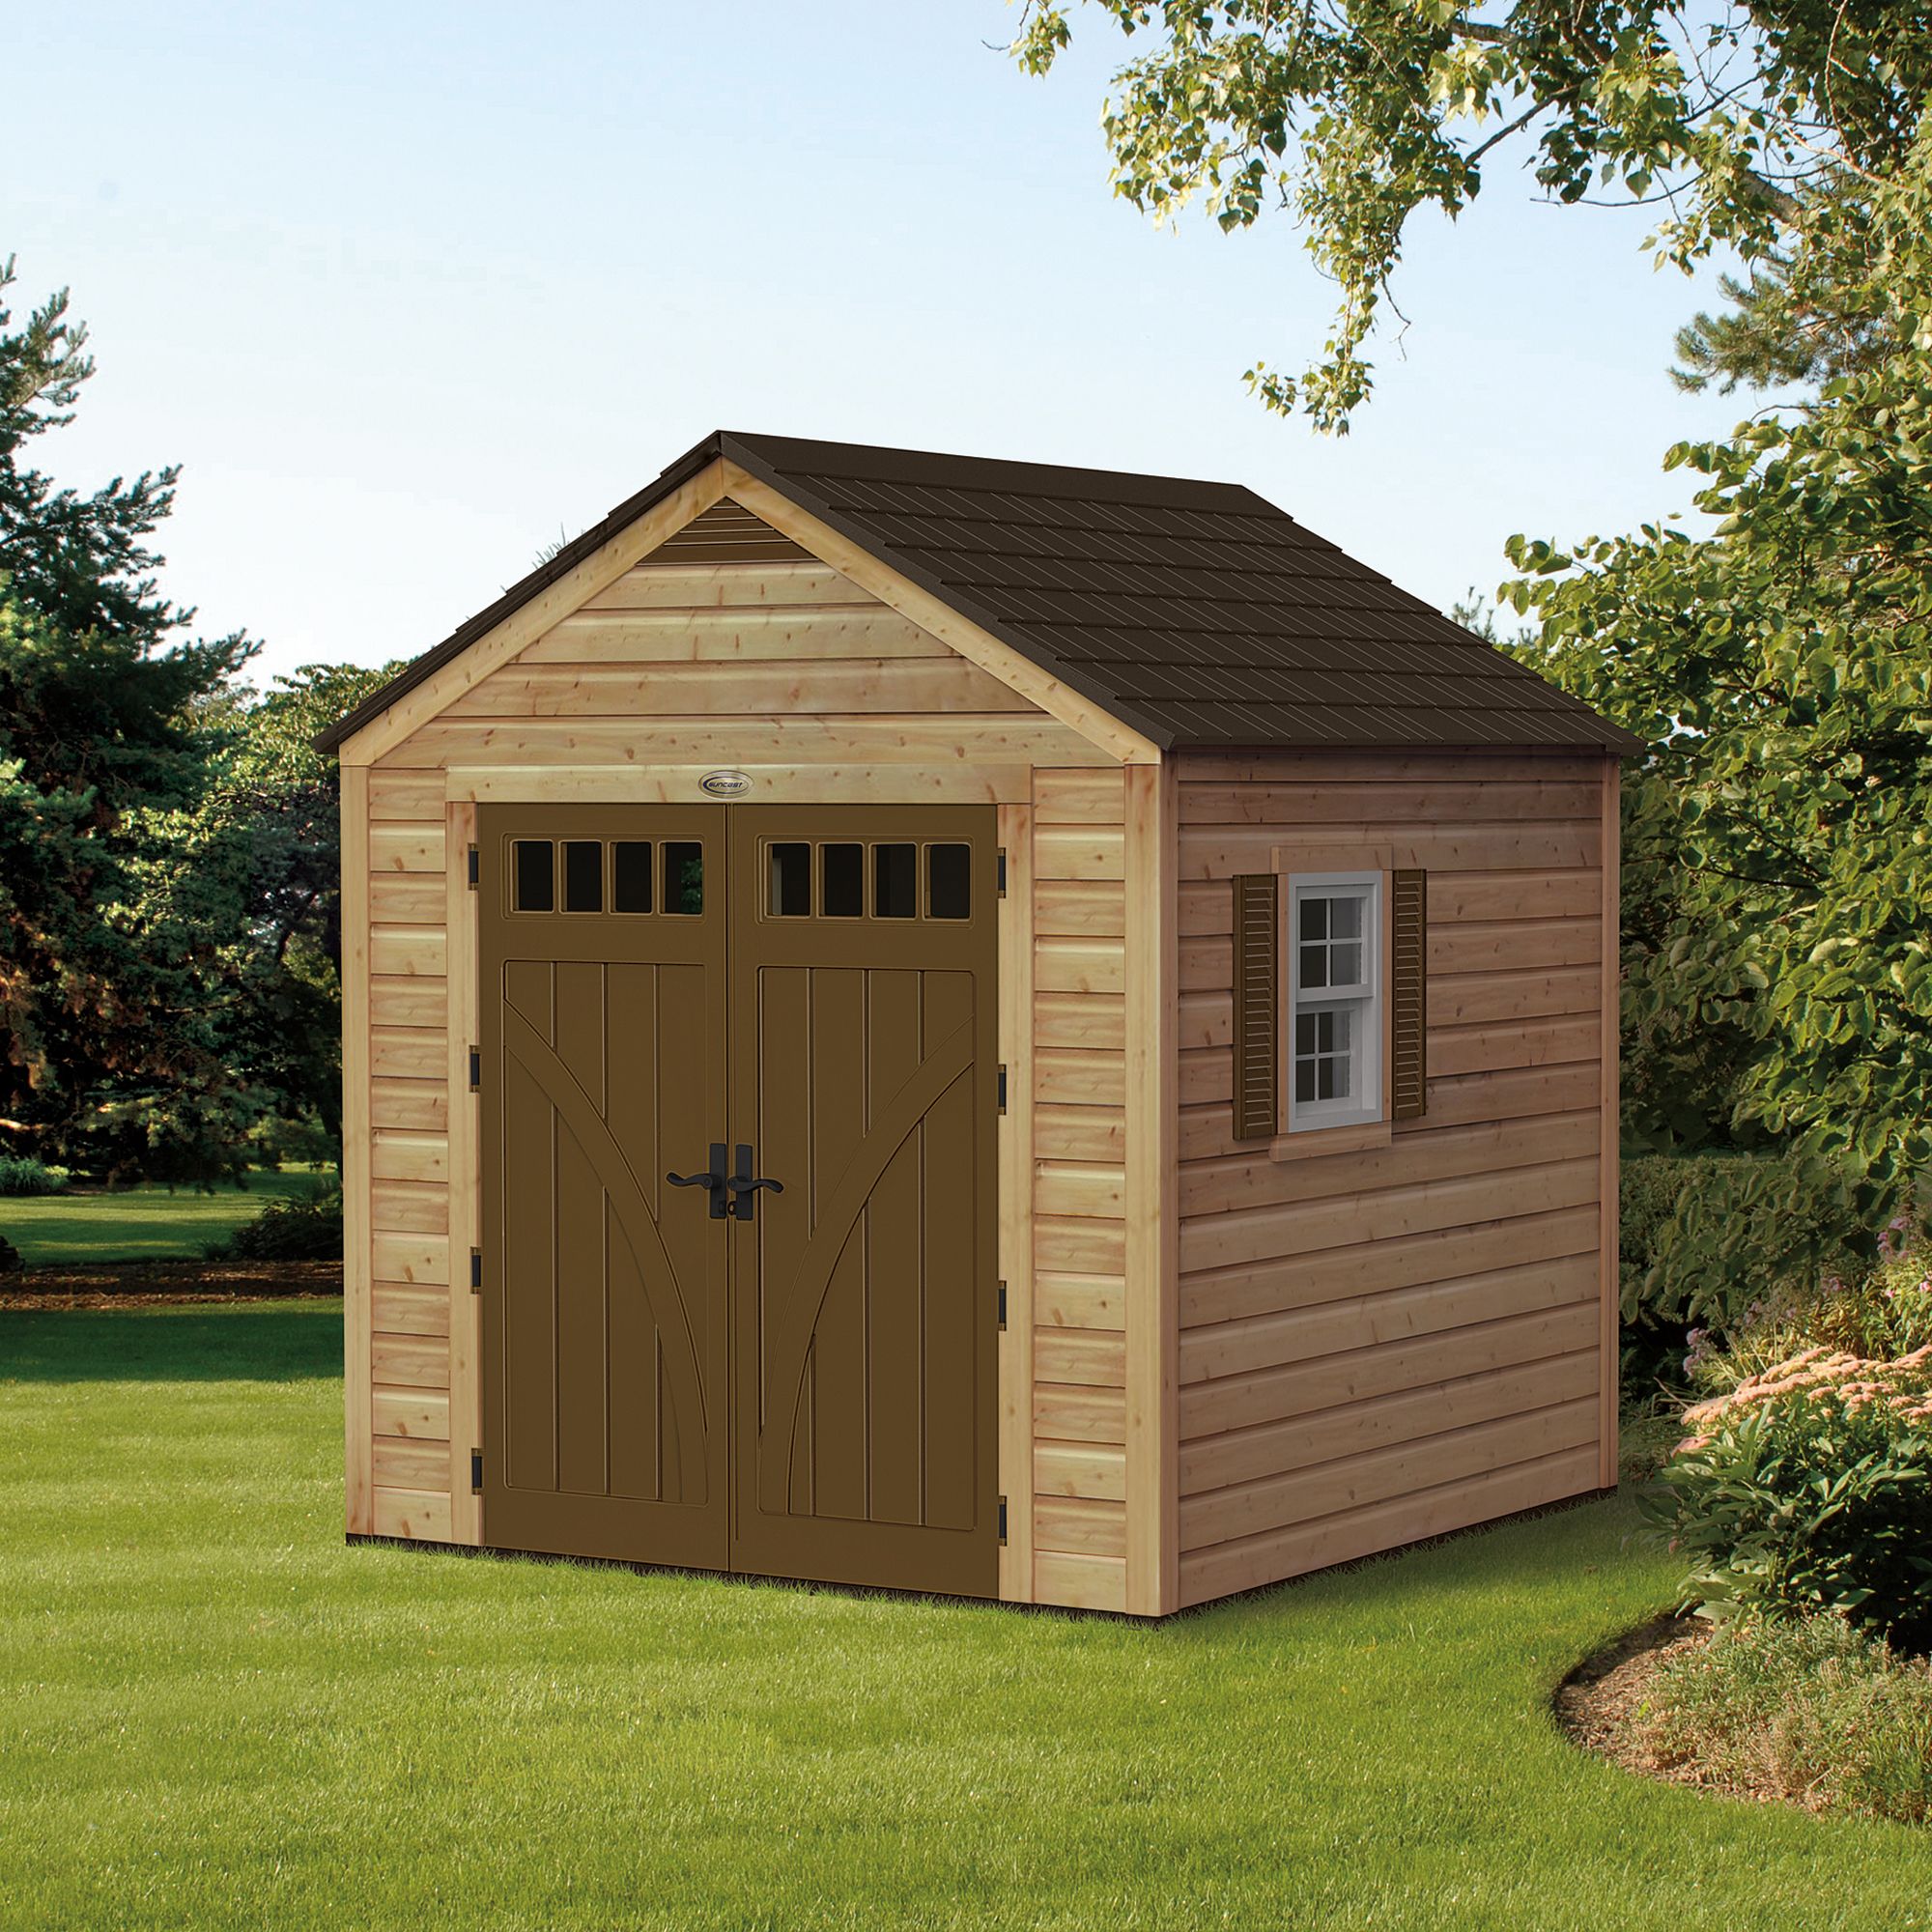 Large Sheds: Get Large Storage Sheds And Storage Buildings at Sears